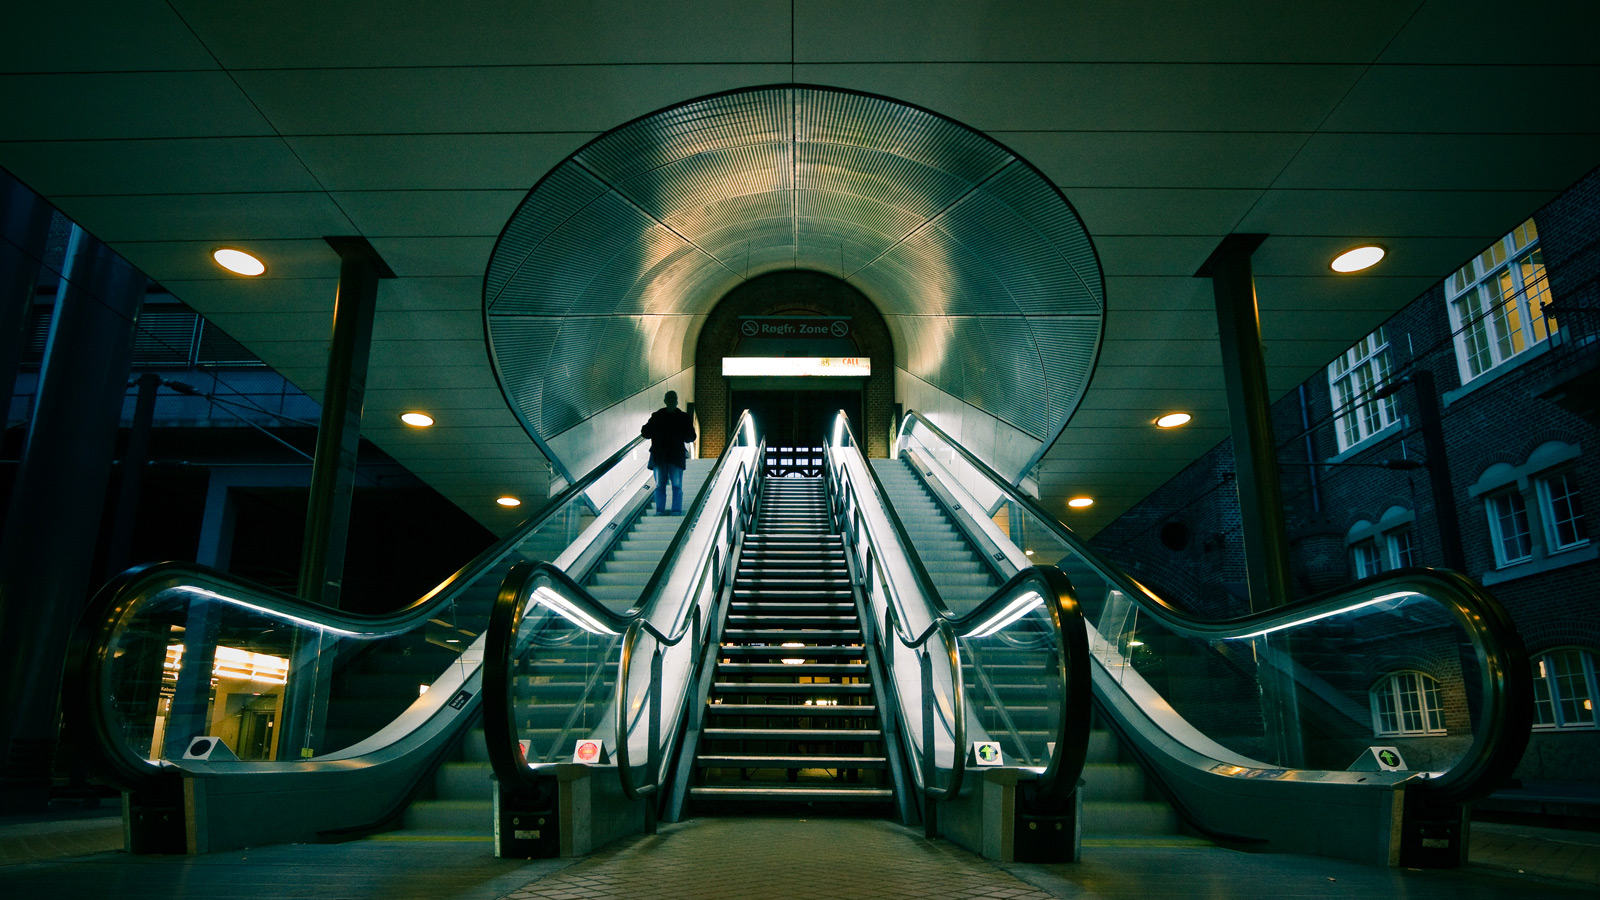 Two spacey looking escalators pointing up to the entrance of the station, one person on the left escalator going up.